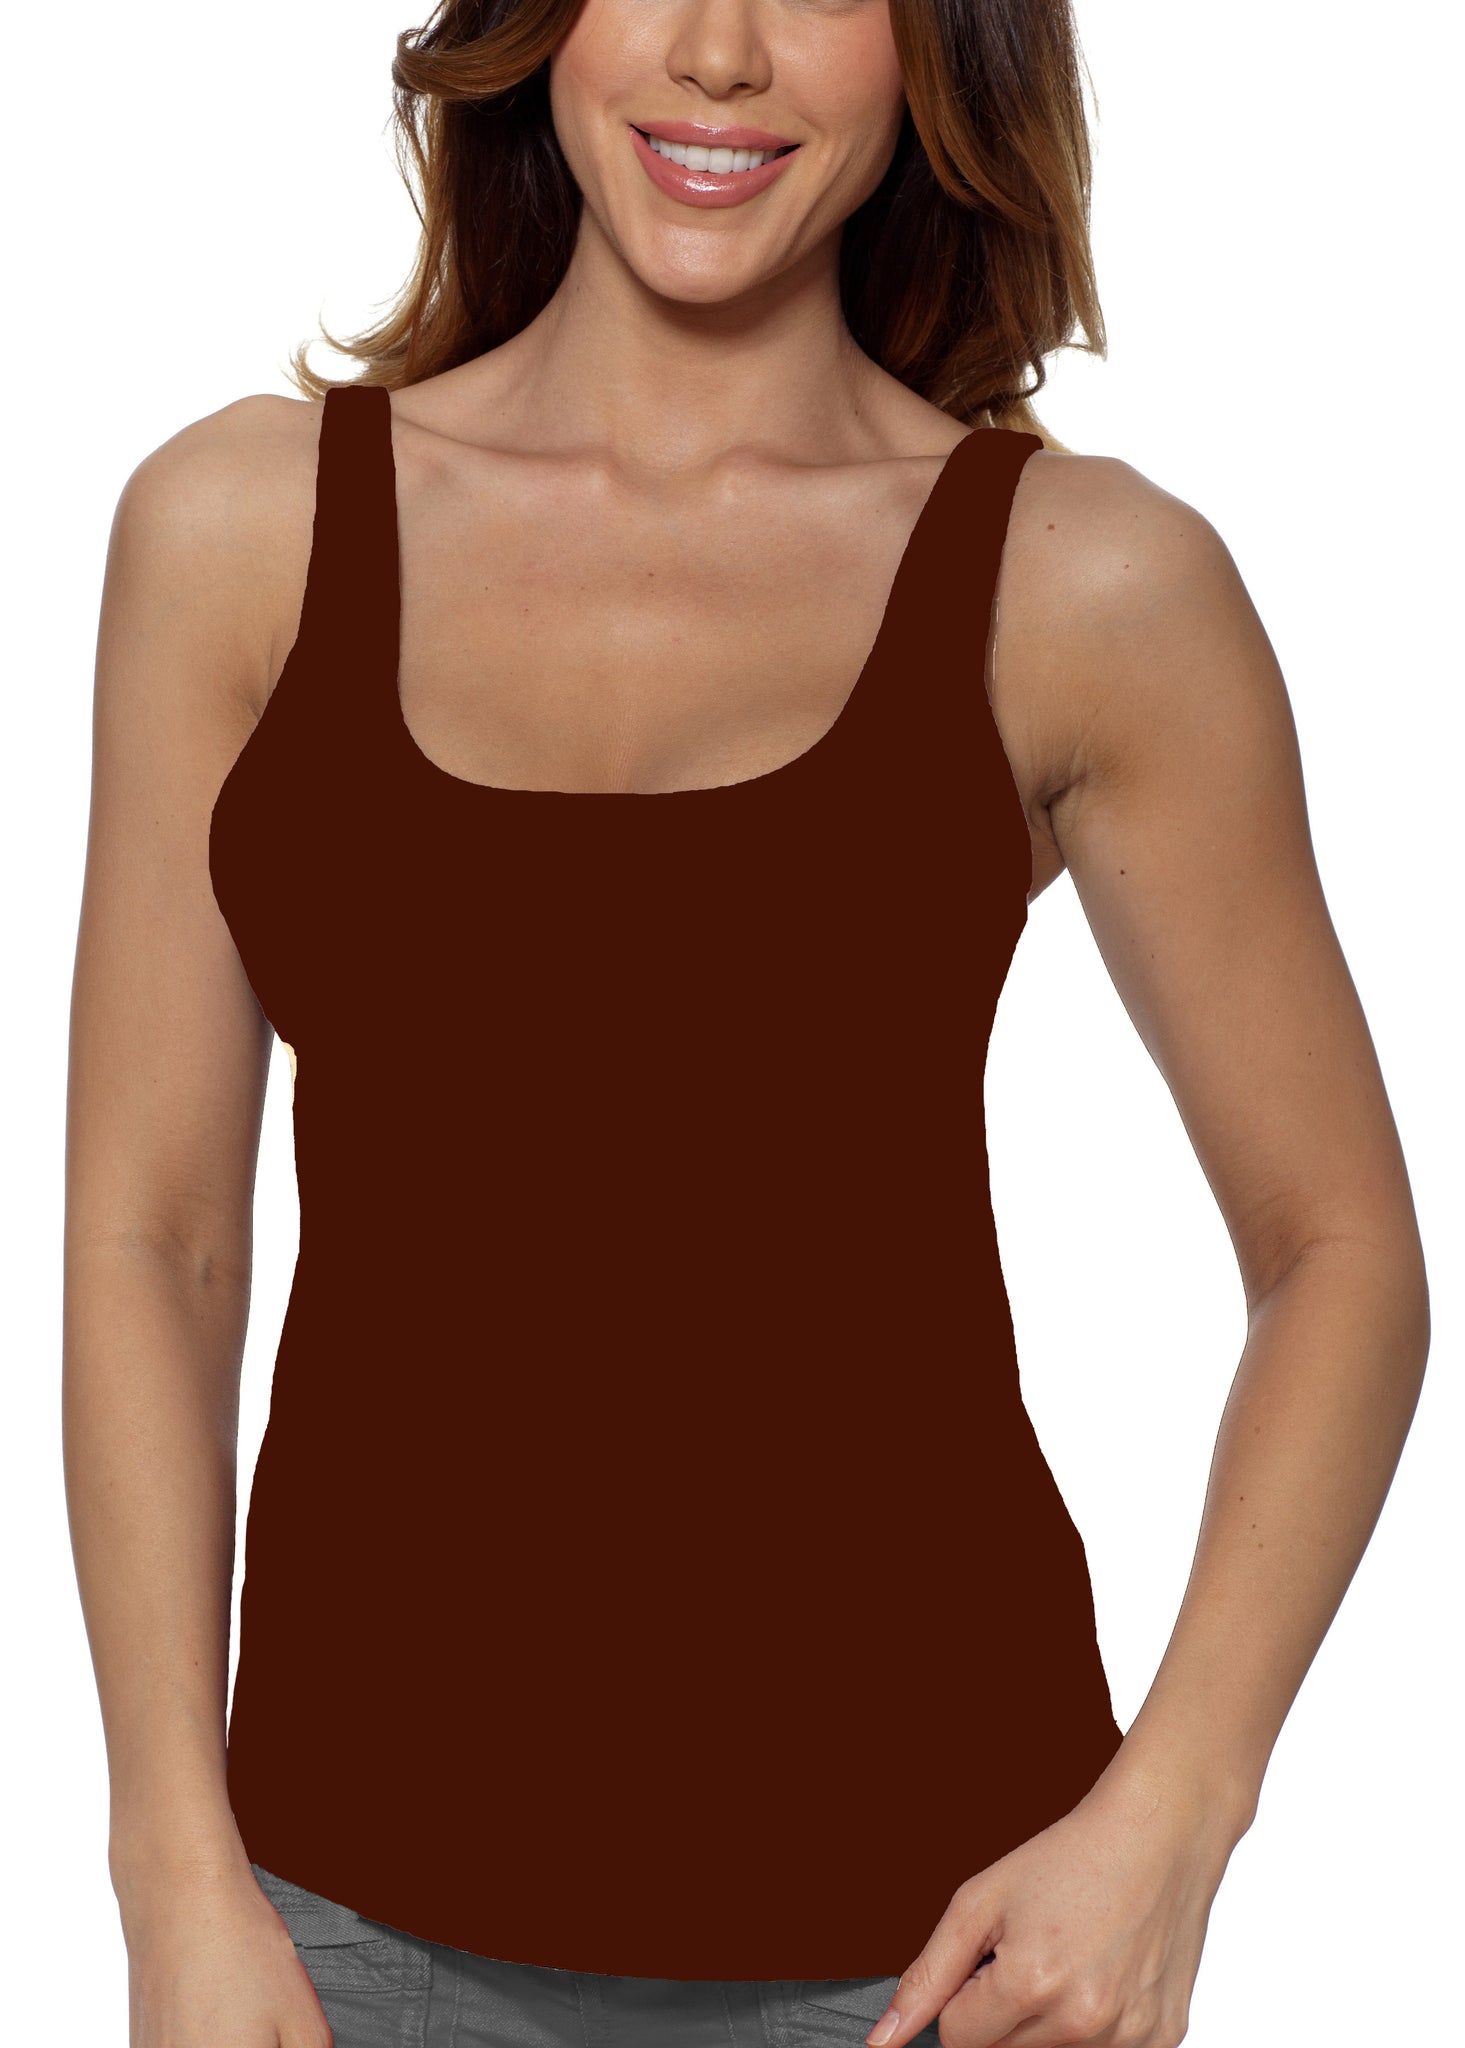 Alessandra B Underwire Bra Cotton Sports Tank Top- Style M3021 - MORE –  Hollywoodobsession